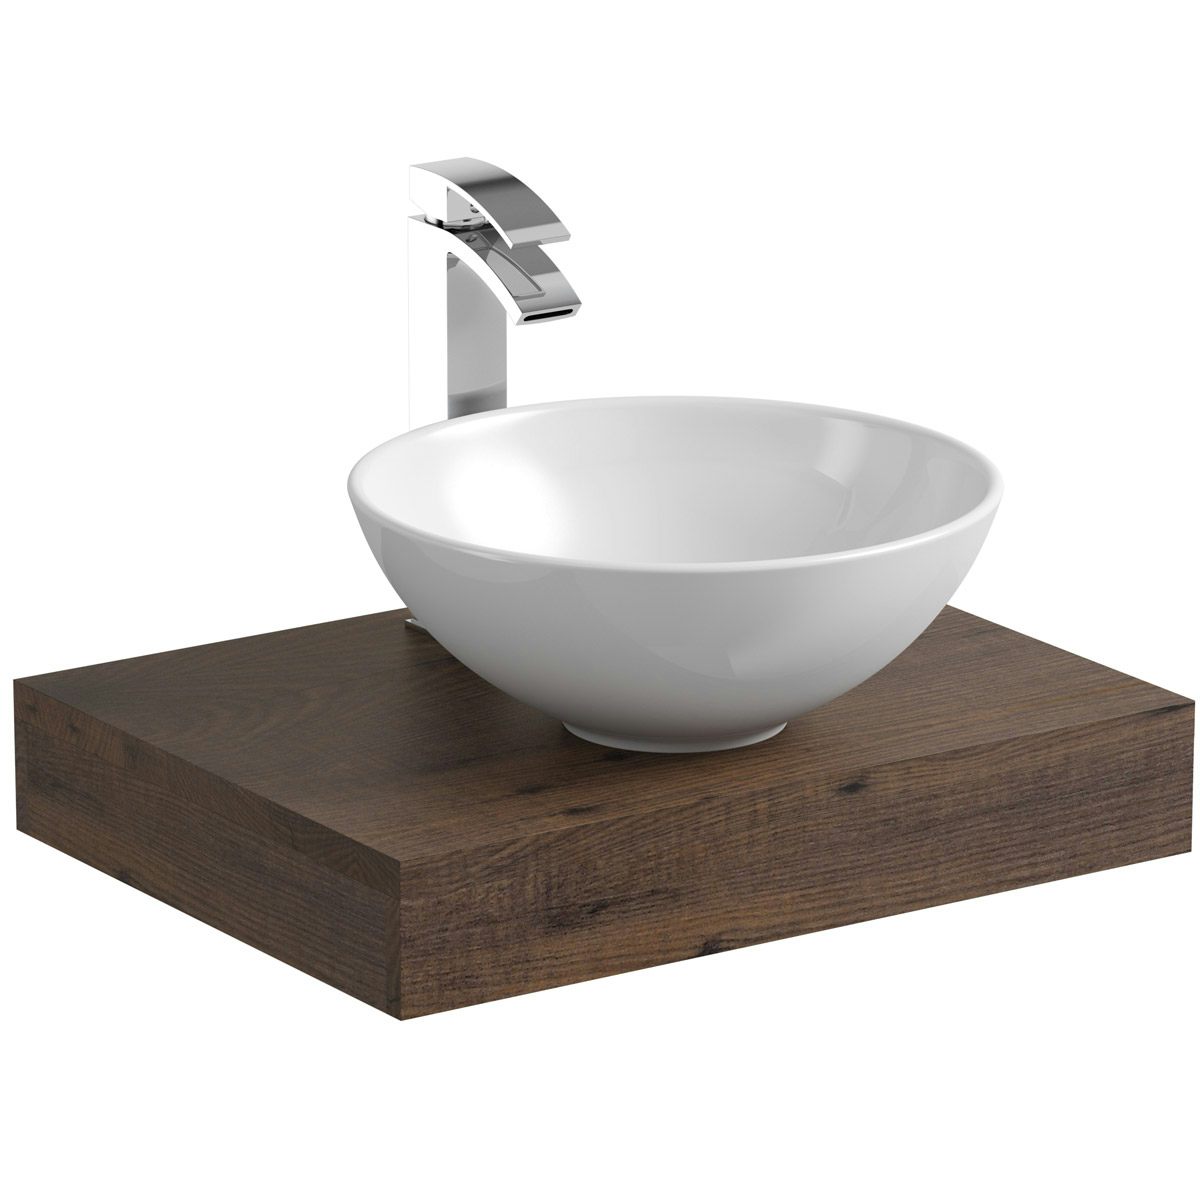 Mode Orion chestnut countertop shelf 600mm with Derwent countertop basin, tap and waste